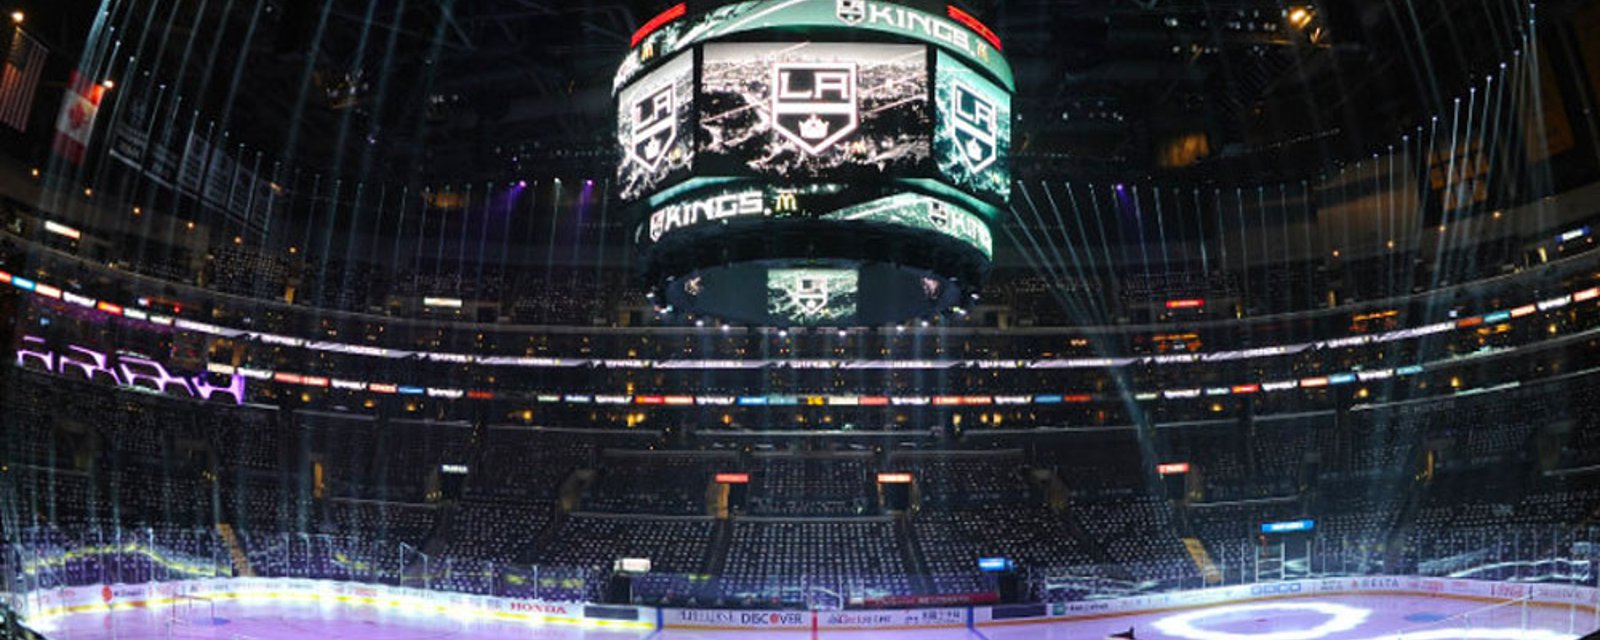 California officially approved to host NHL games